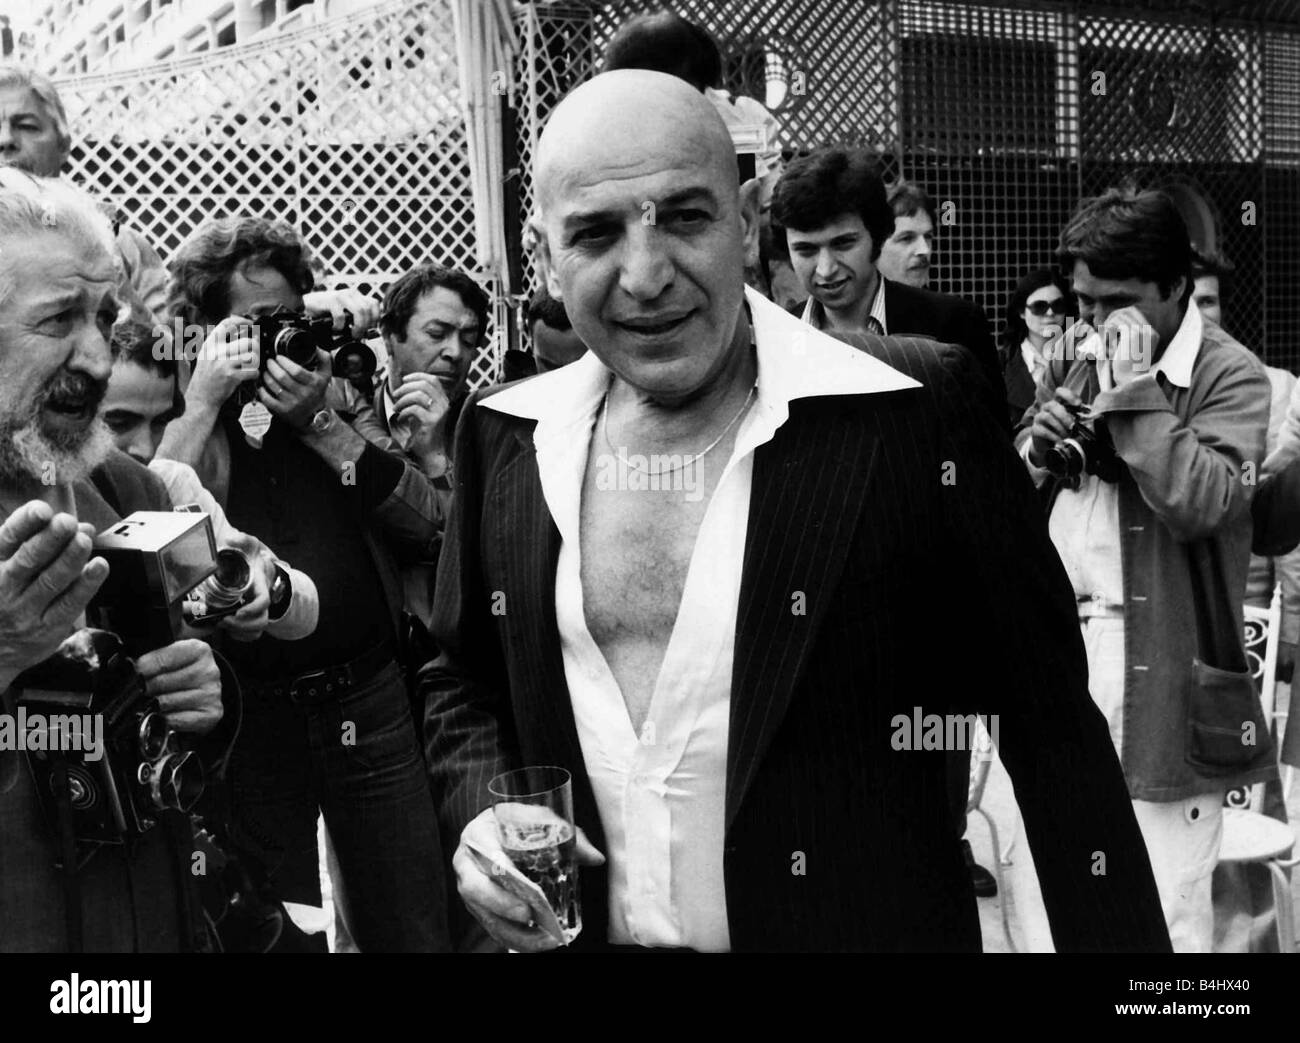 Telly Savalas Greek actor at Cannes 1977 Stock Photo